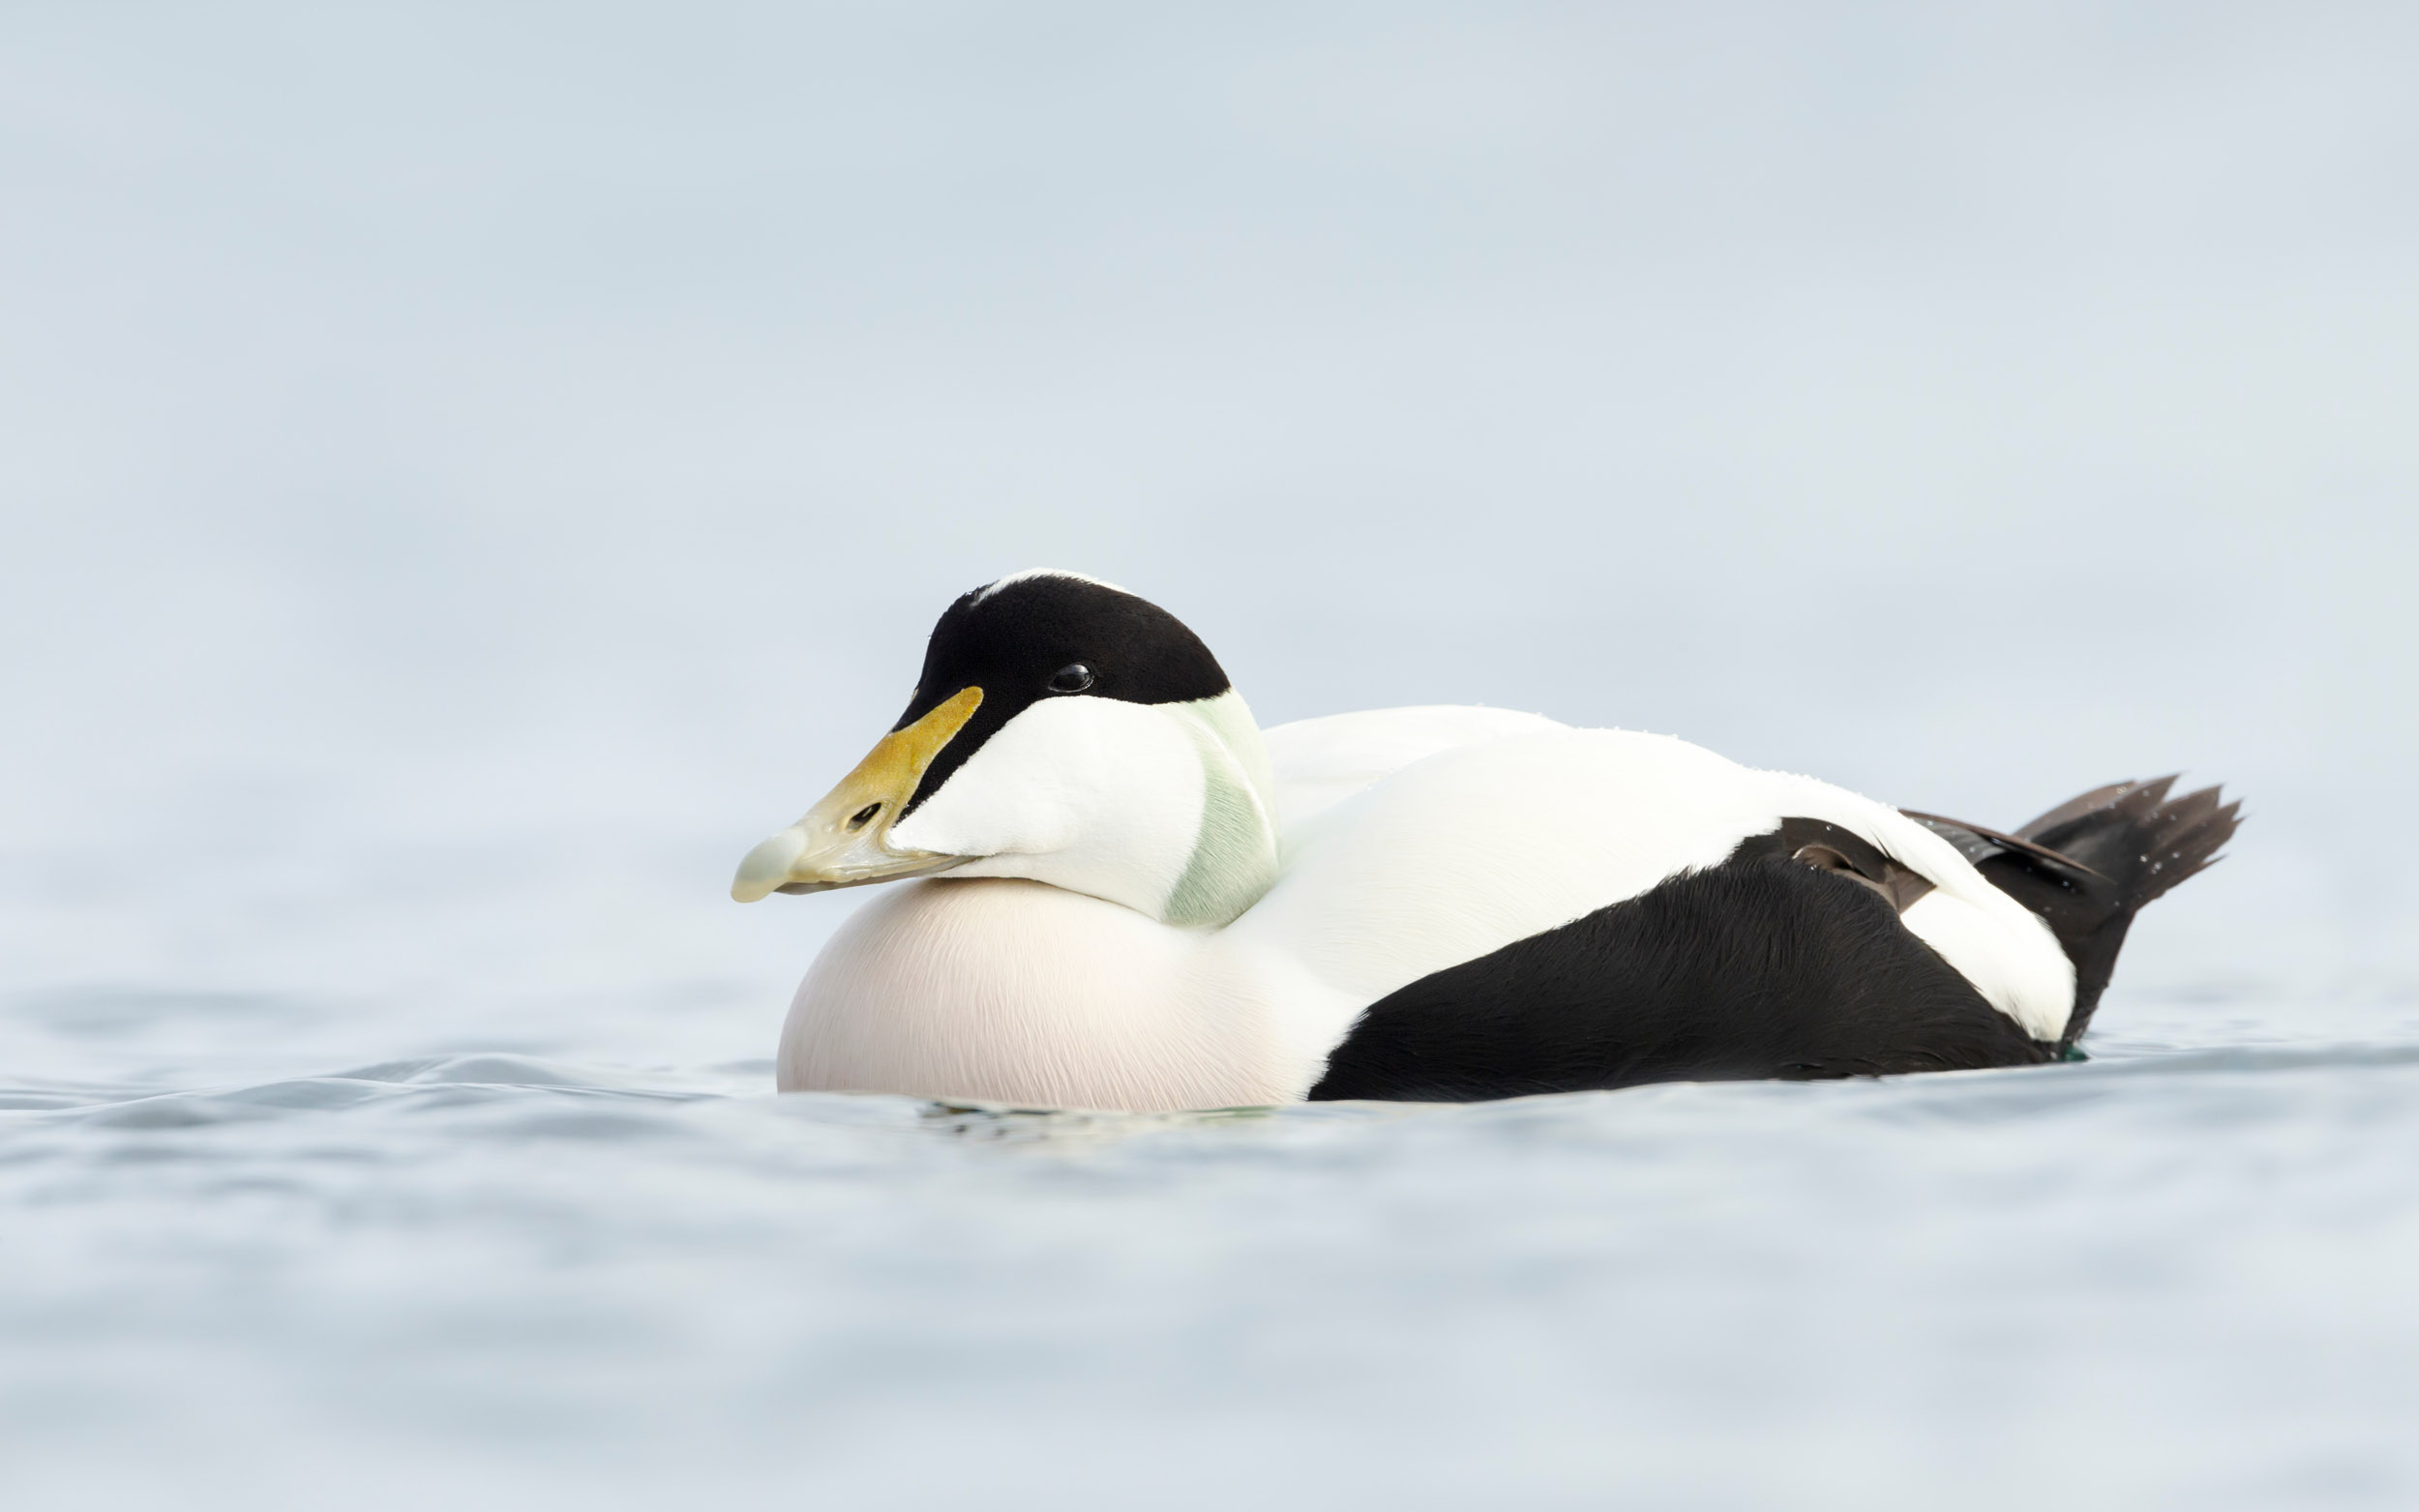 A male Eider Duck swimming on a body of water.